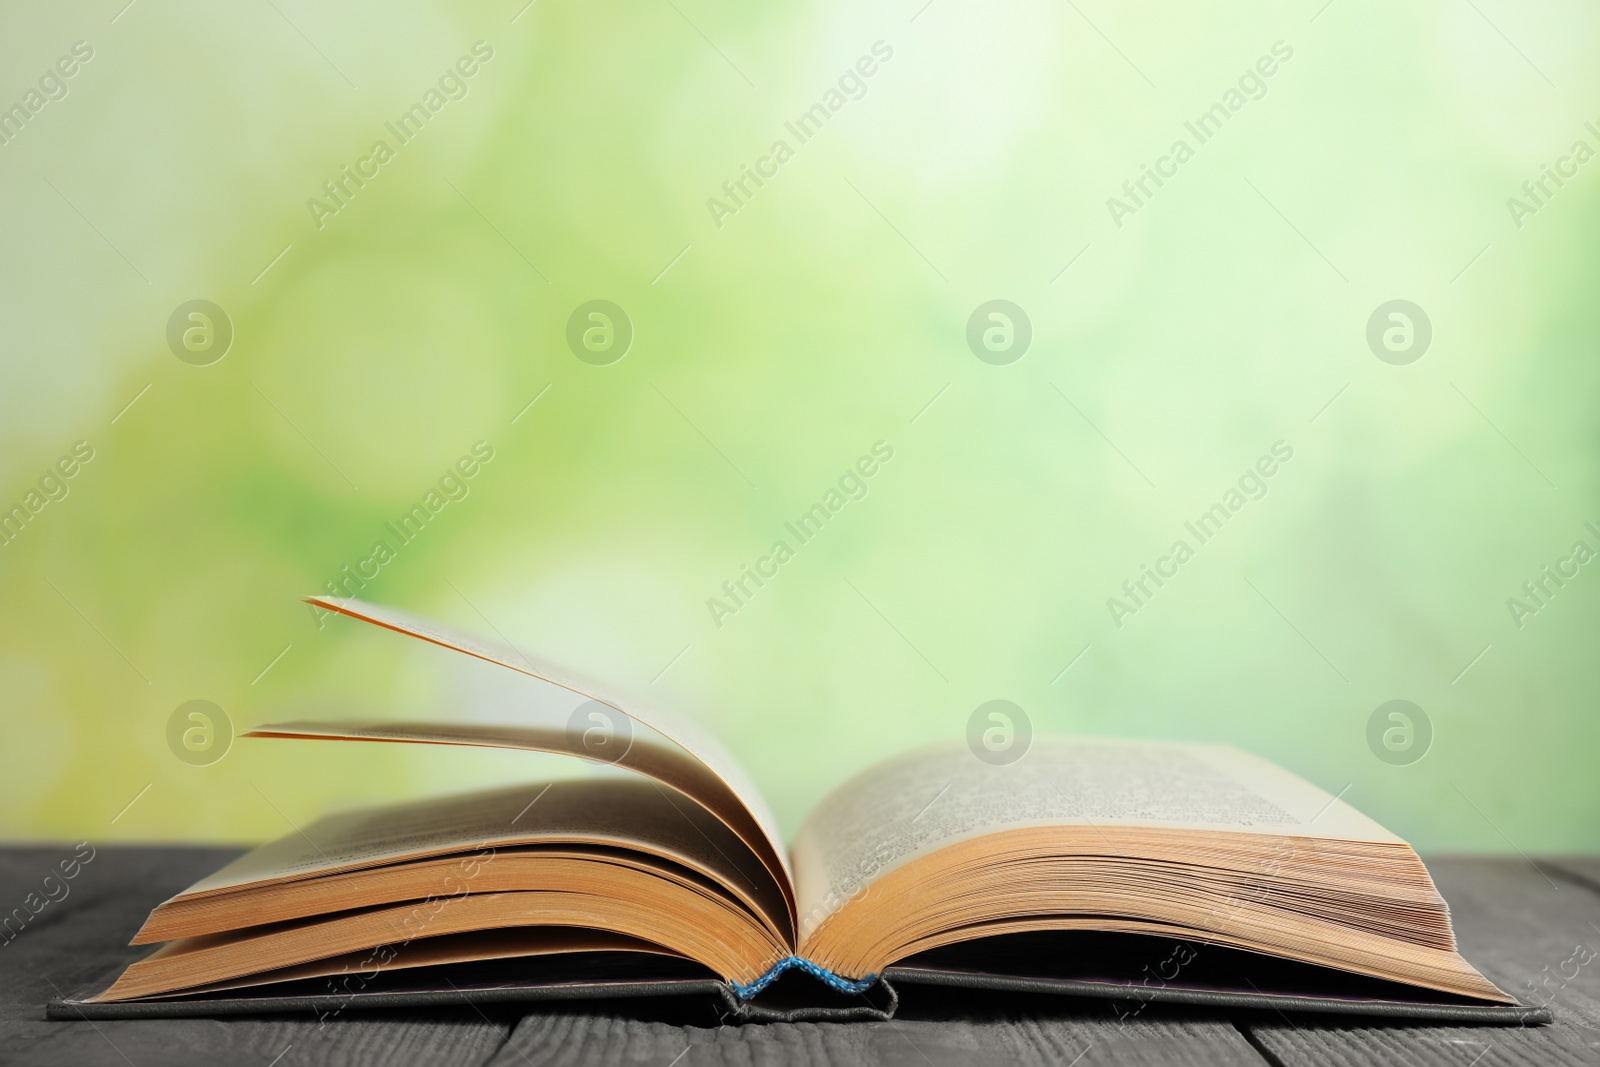 Photo of Open book on blue wooden table against blurred green background. Space for text